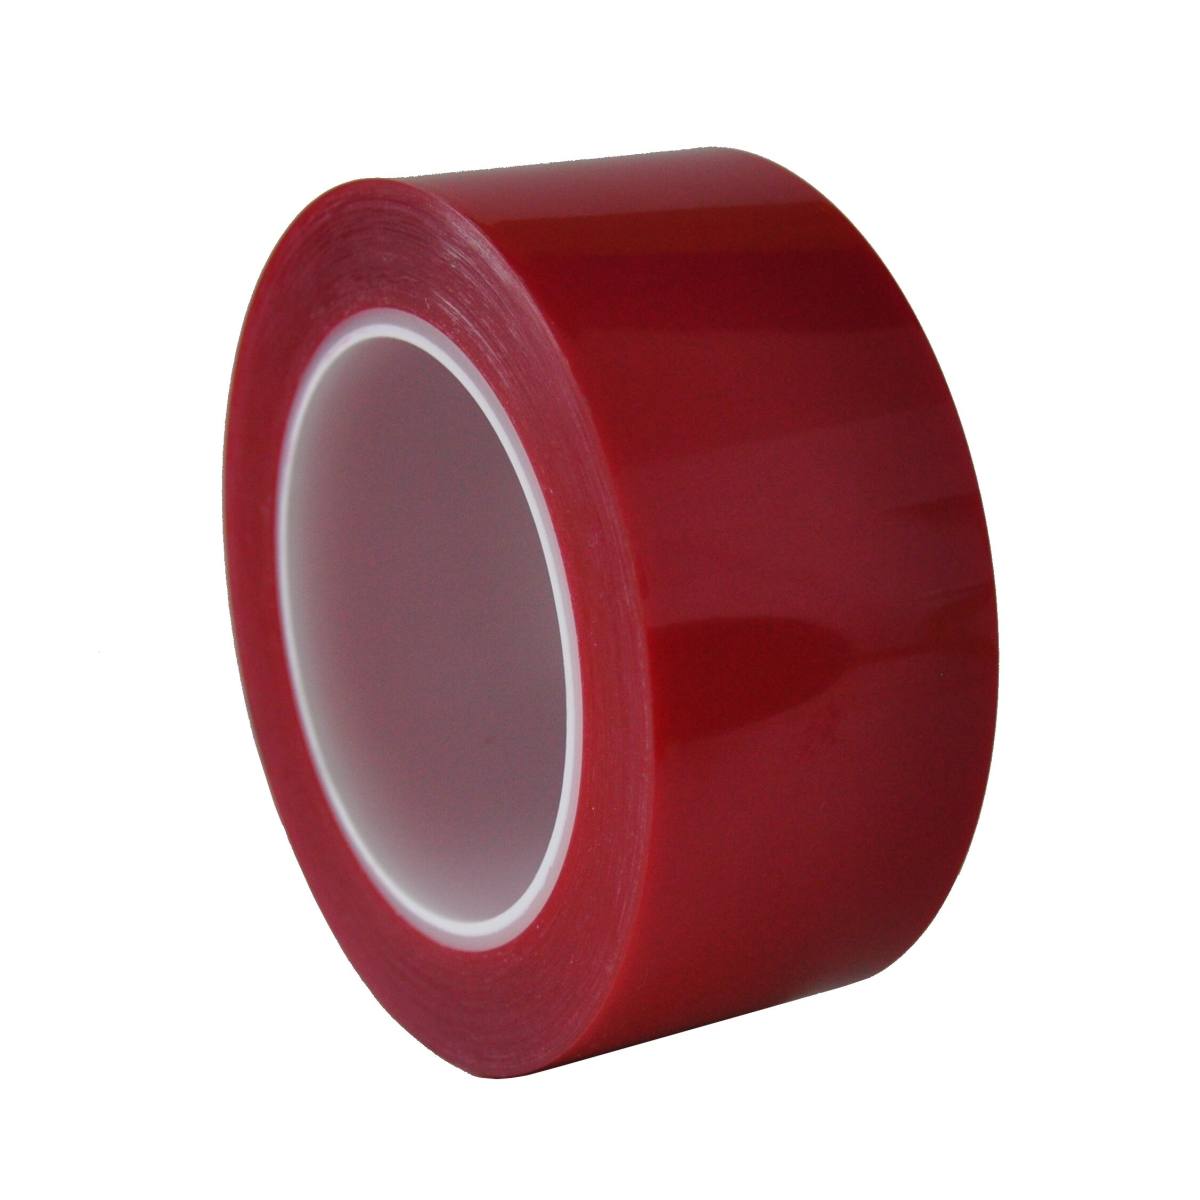 S-K-S 208R polyester plakband, 19mmx66m, rood